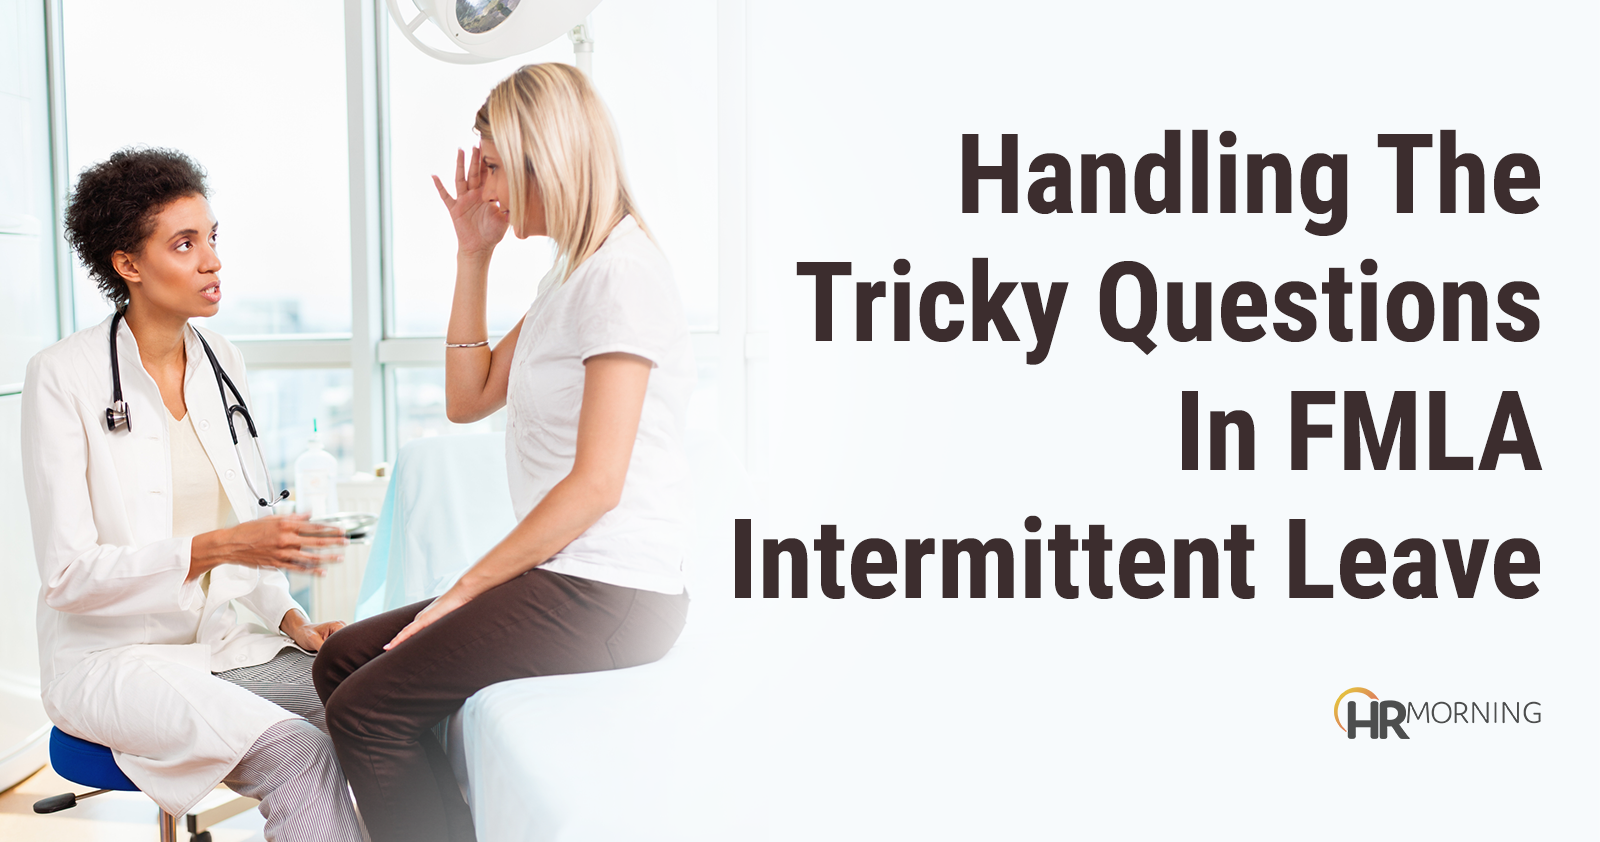 Handling the Tricky Questions in FMLA Intermittent Leave